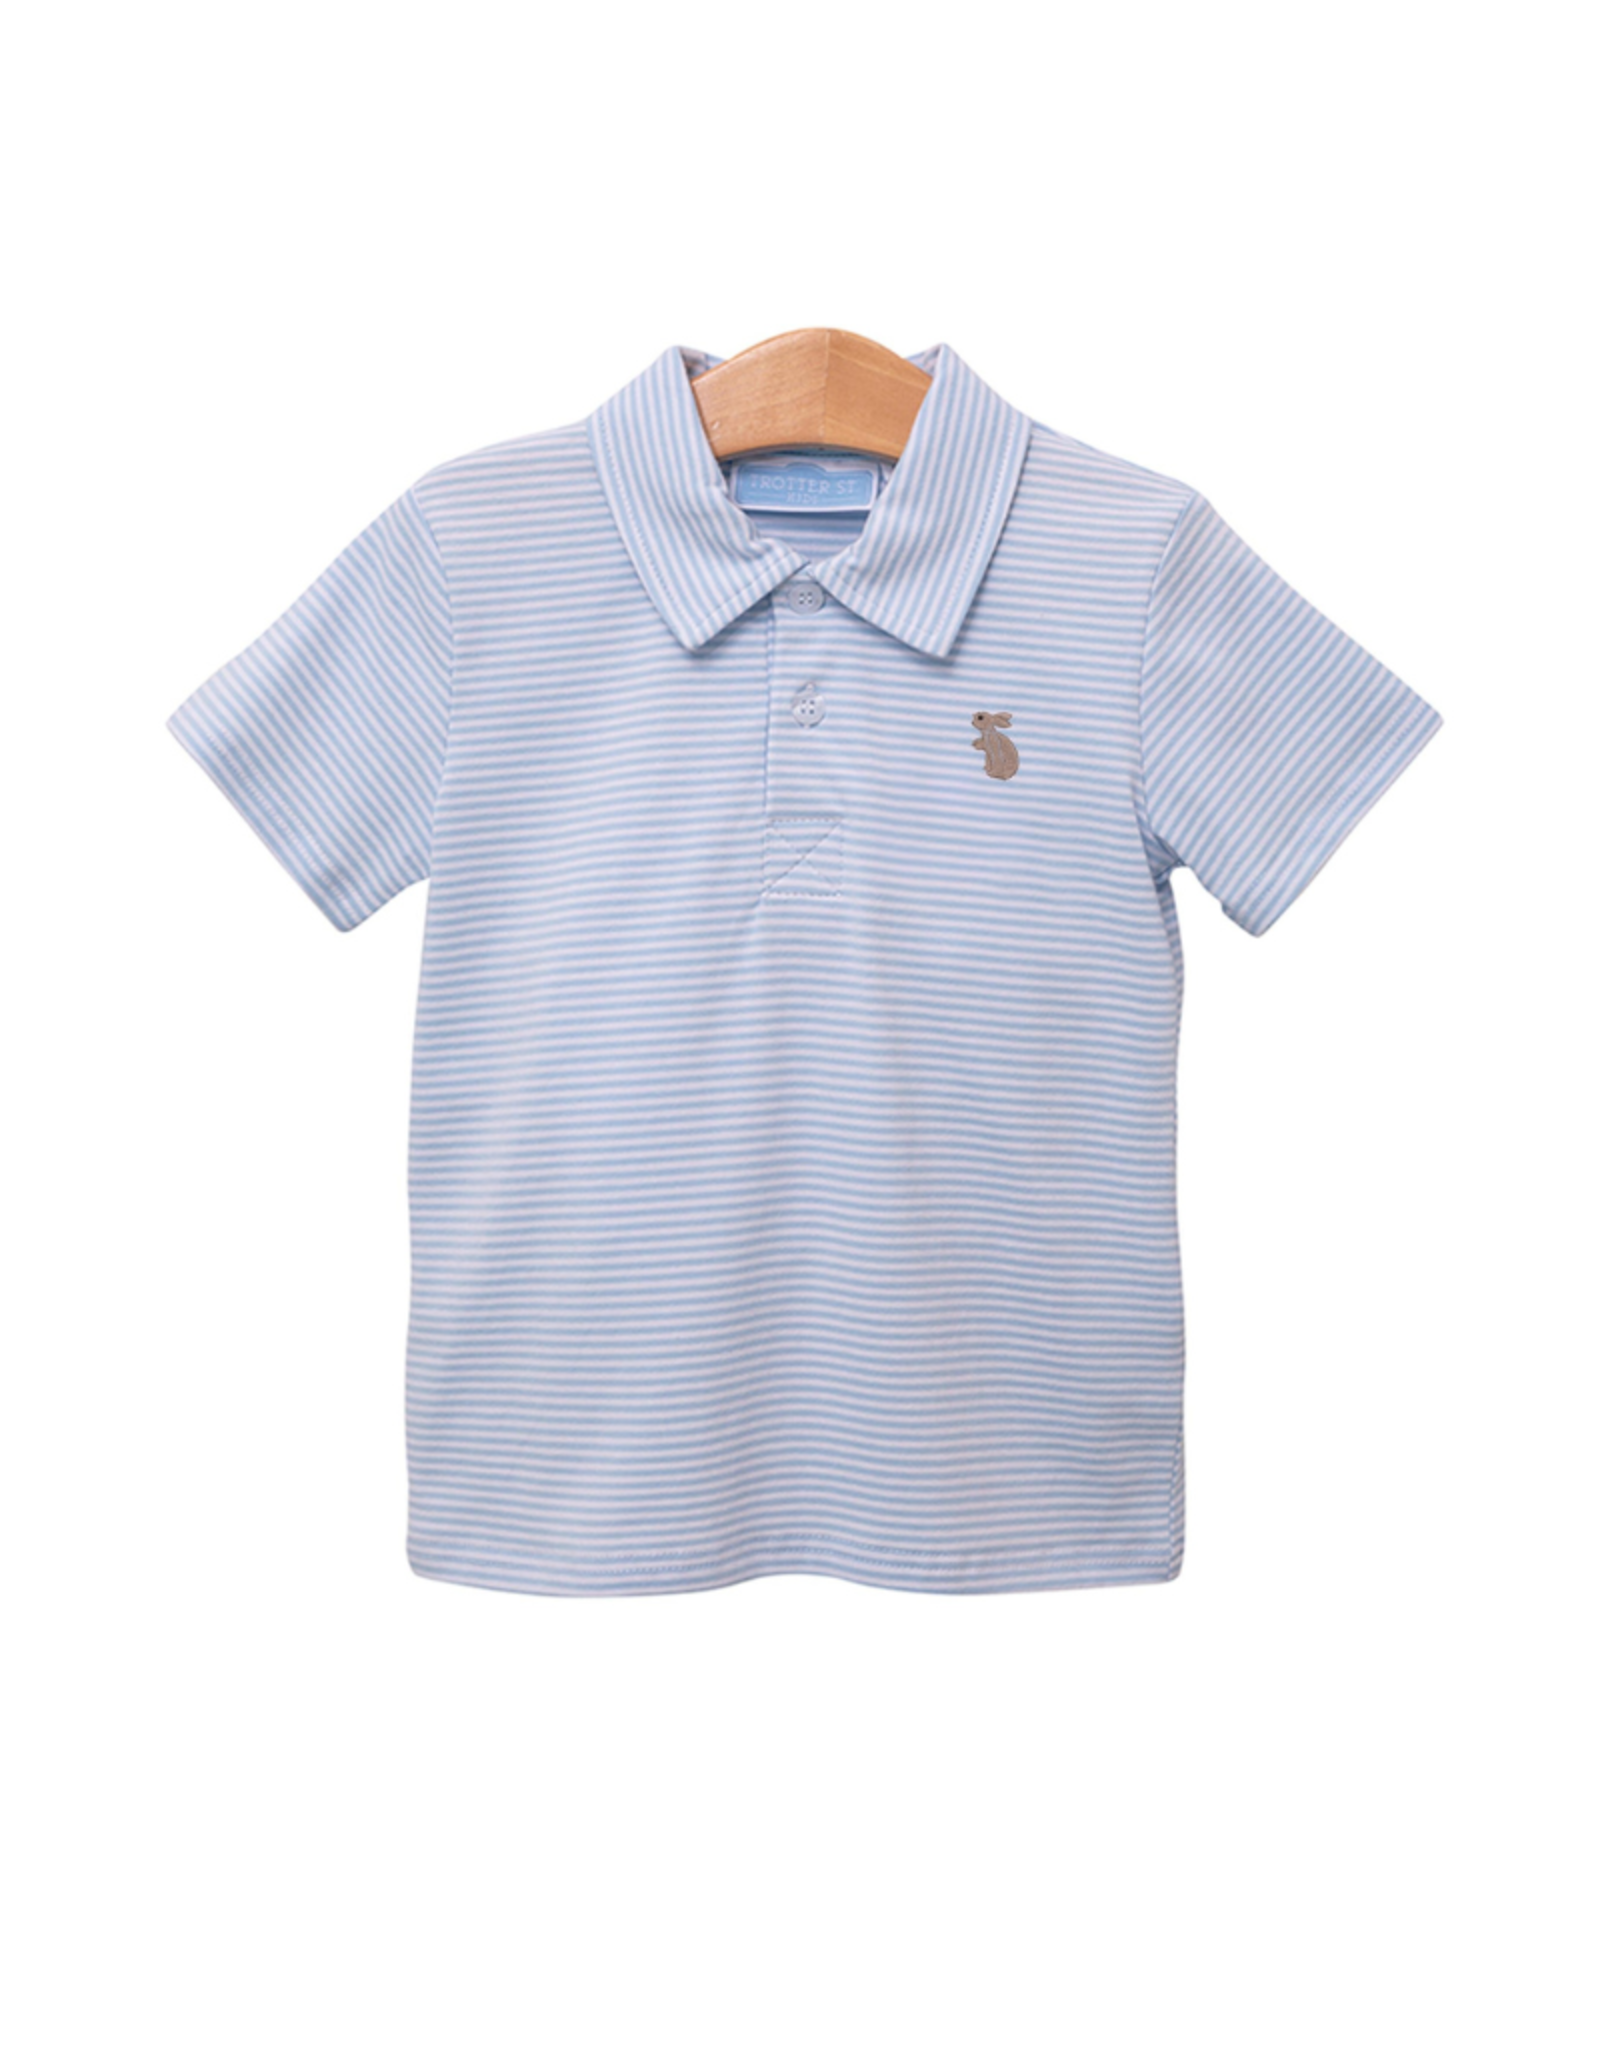 Trotter Street Kids Bunny Embroidery Polo